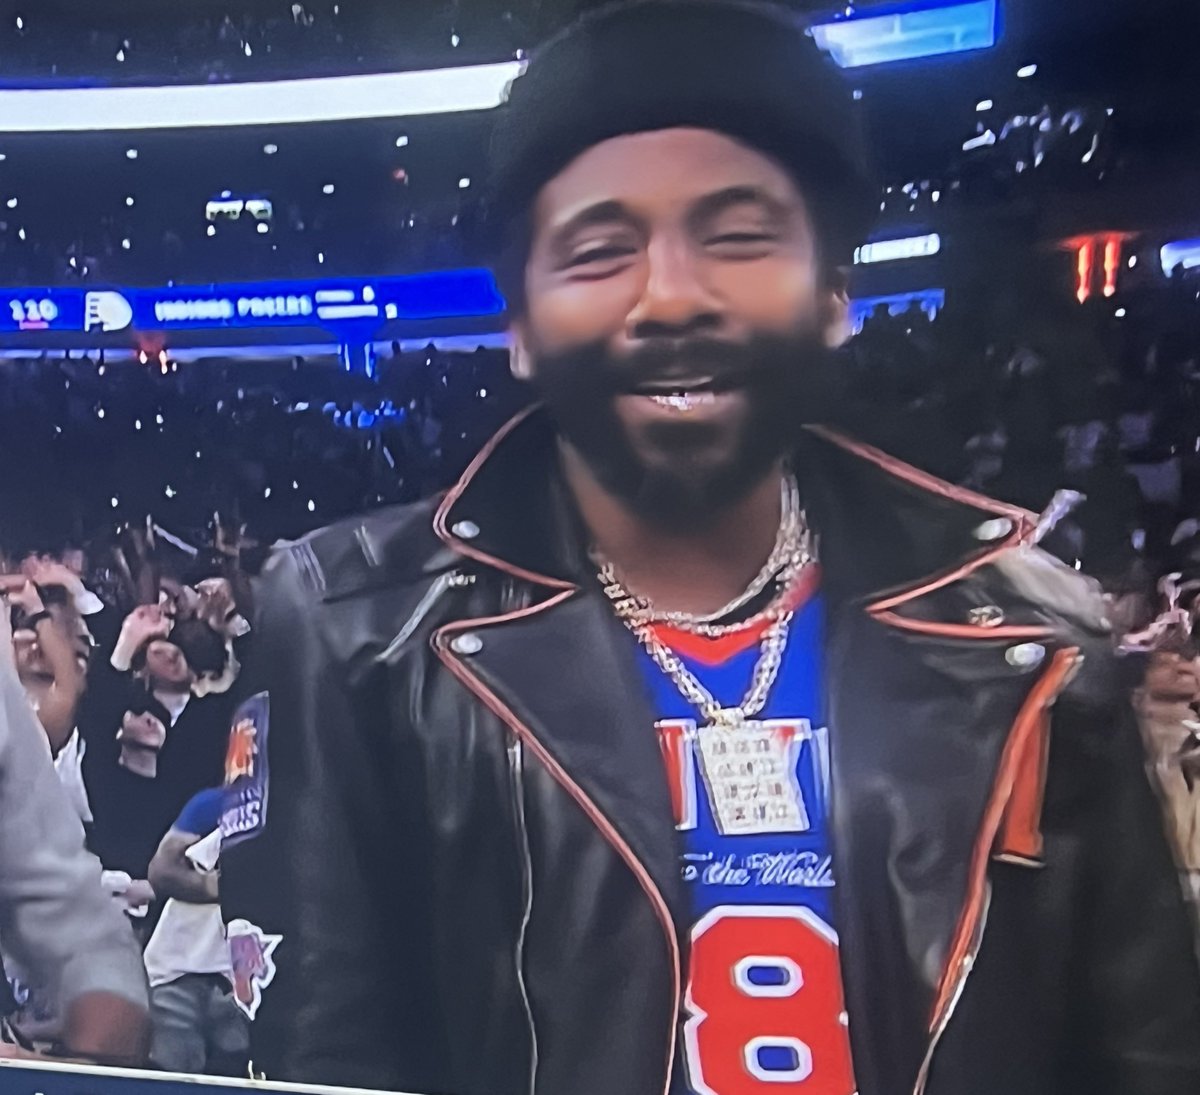 Amar’e Stoudamire with the fly jacket that went well with the Knicks’ jersey. Cool patches on the side that represented his NBA journey. 🔥